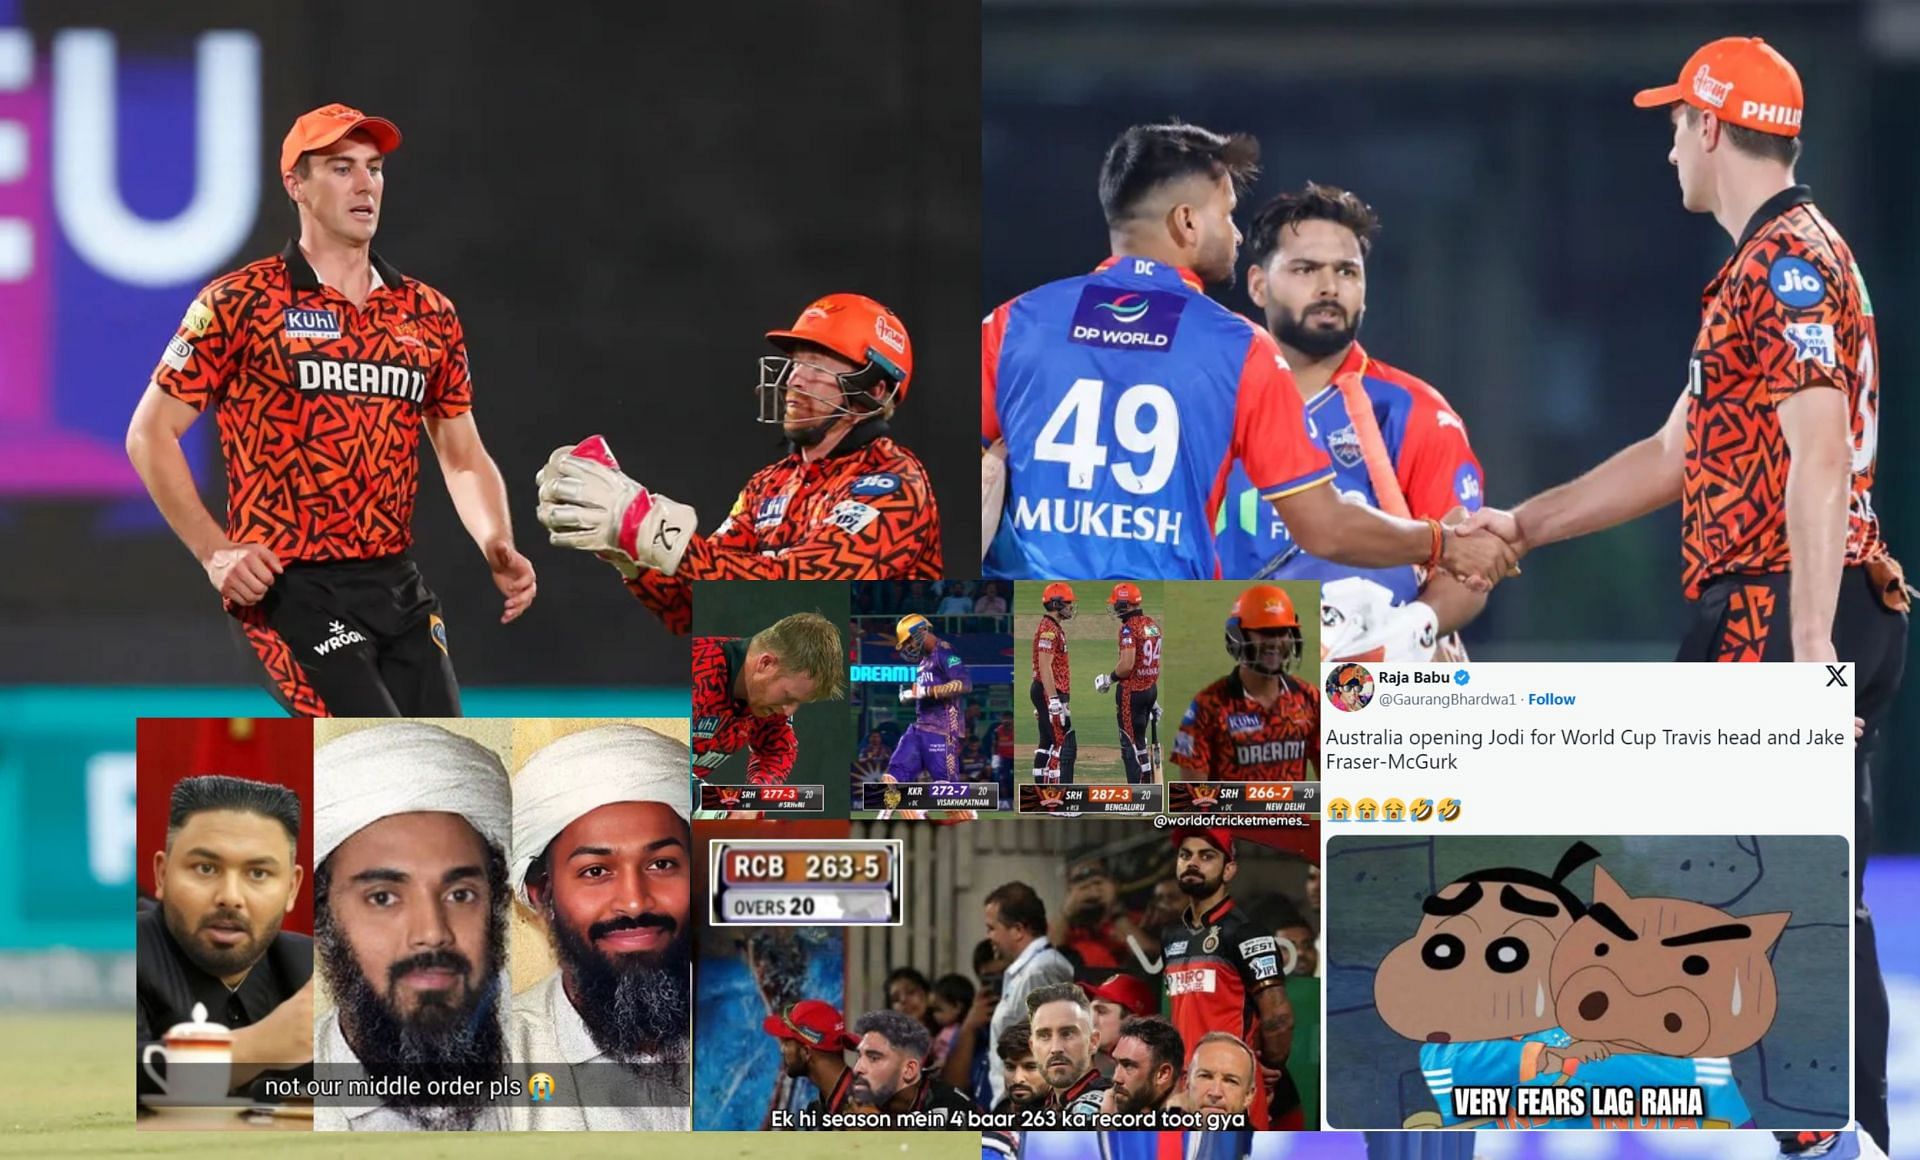 Top 10 funny memes from the latest IPL match.